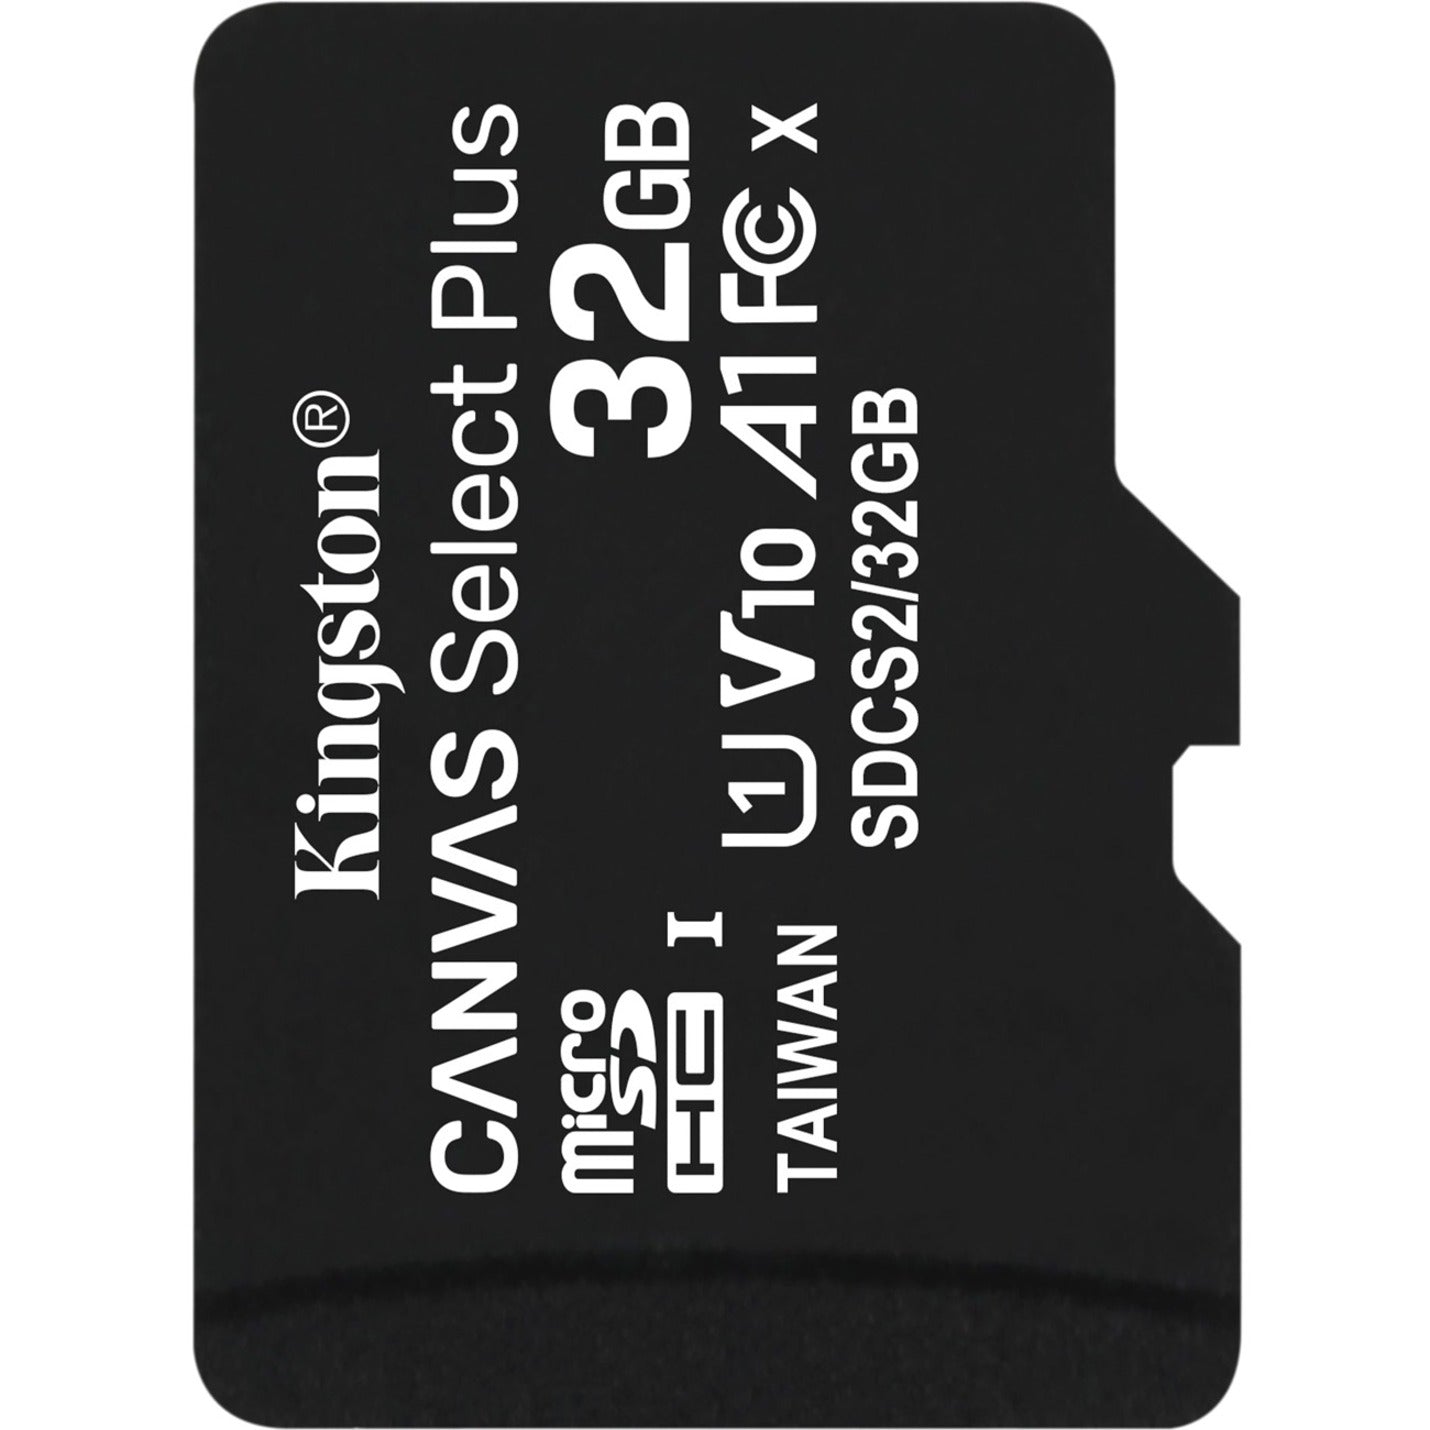 Kingston SDCS2/32GBSP Canvas Select Plus microSD Card With Android A1 Performance Class, 32GB Storage Capacity, 100 MB/s Read Speed, Class 10/UHS-I (U1)